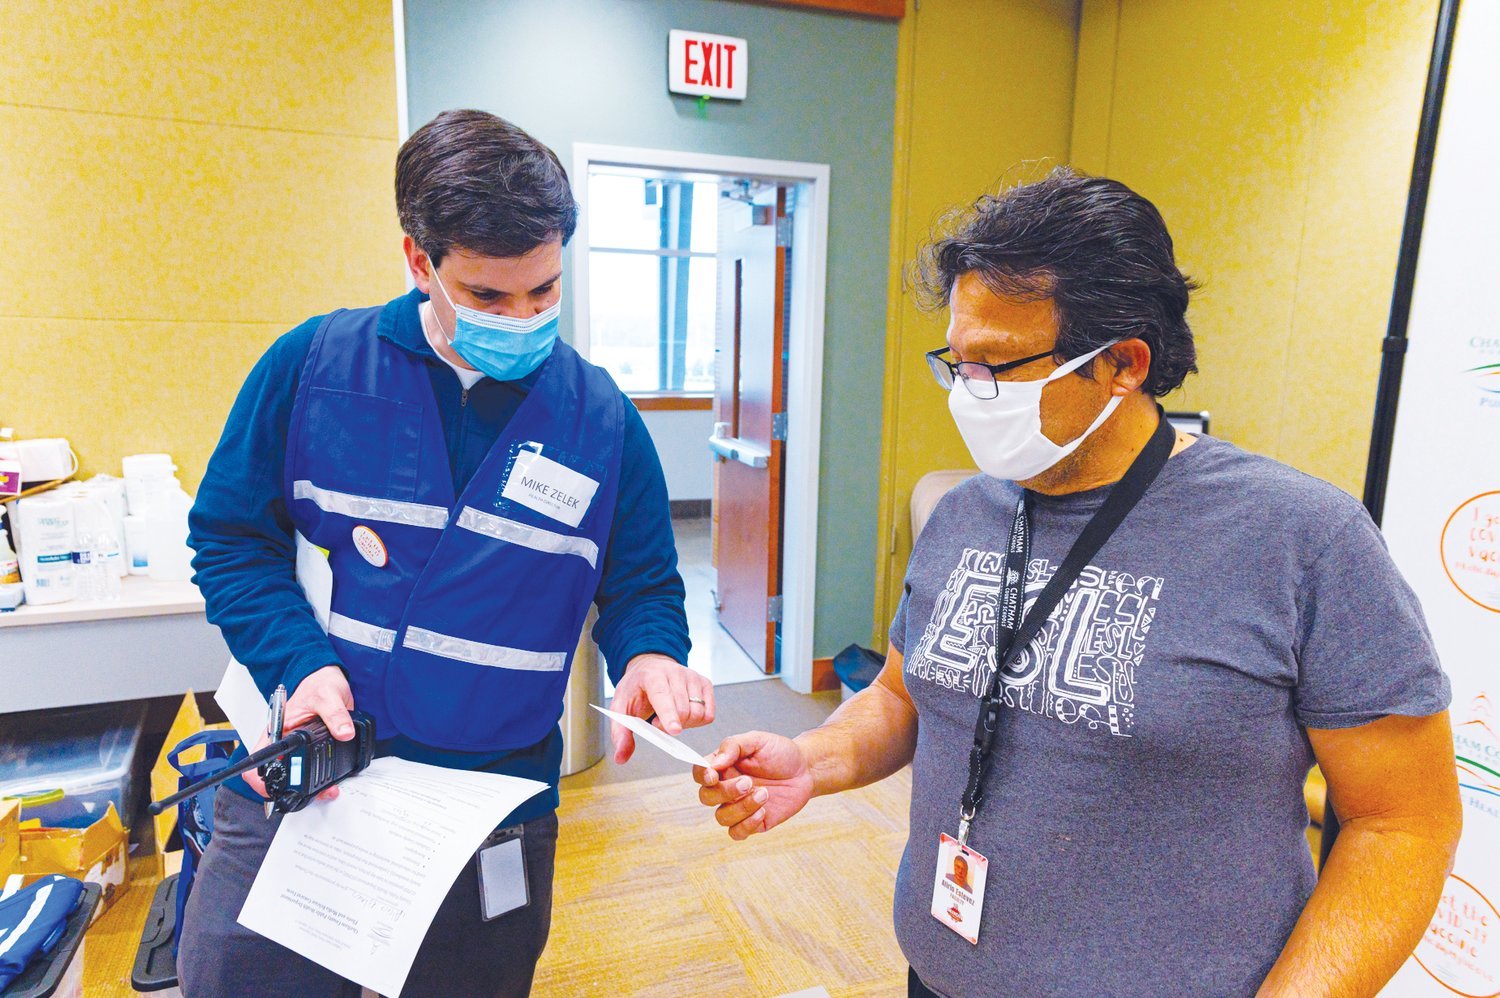 Chatham County Public Health Director Mike Zelek hands Alirio Estevez his second-dose appointment slip during a vaccination event earlier this year.